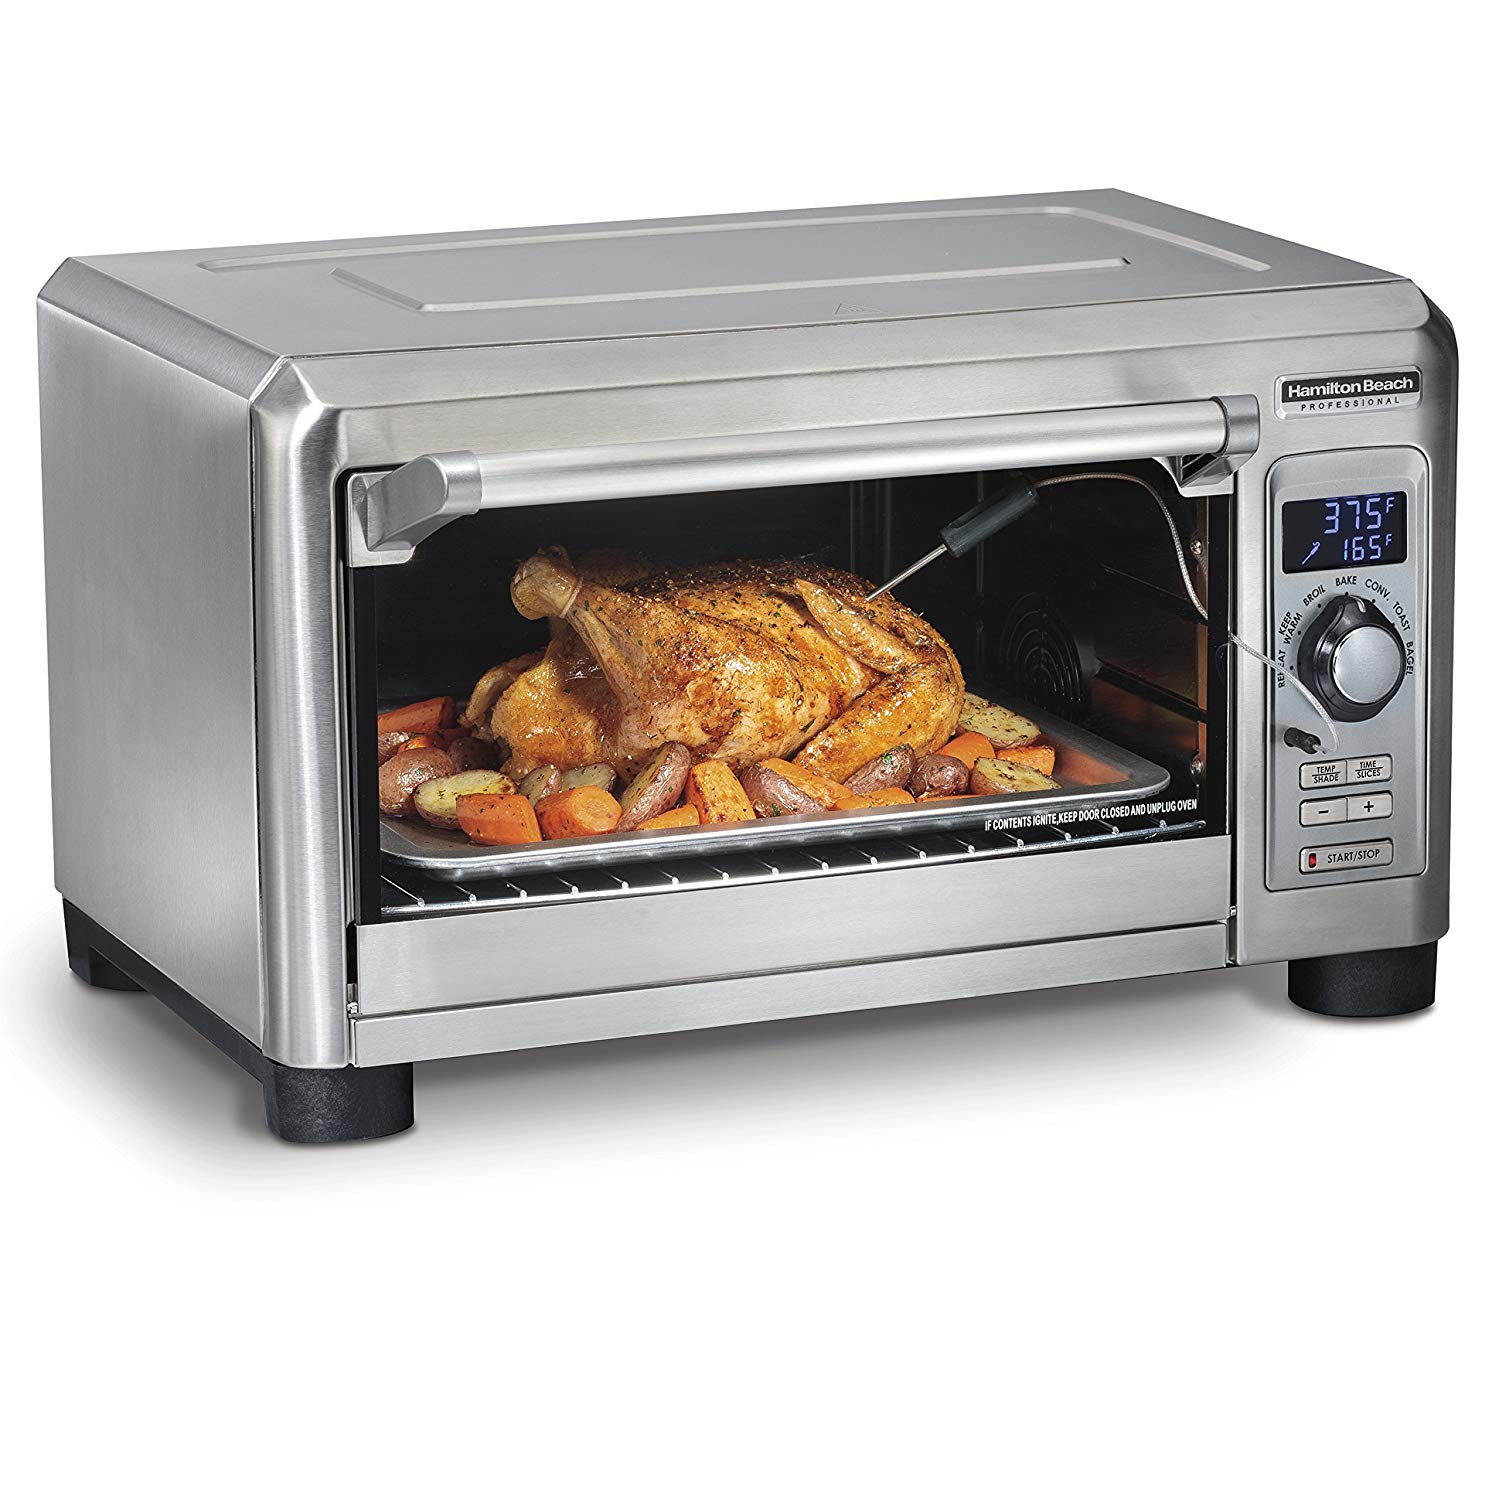 Hamilton Beach Professional 31240 Toaster Countertop Oven Convection, fits 6 Slices of Bread, Large, Stainless Steel